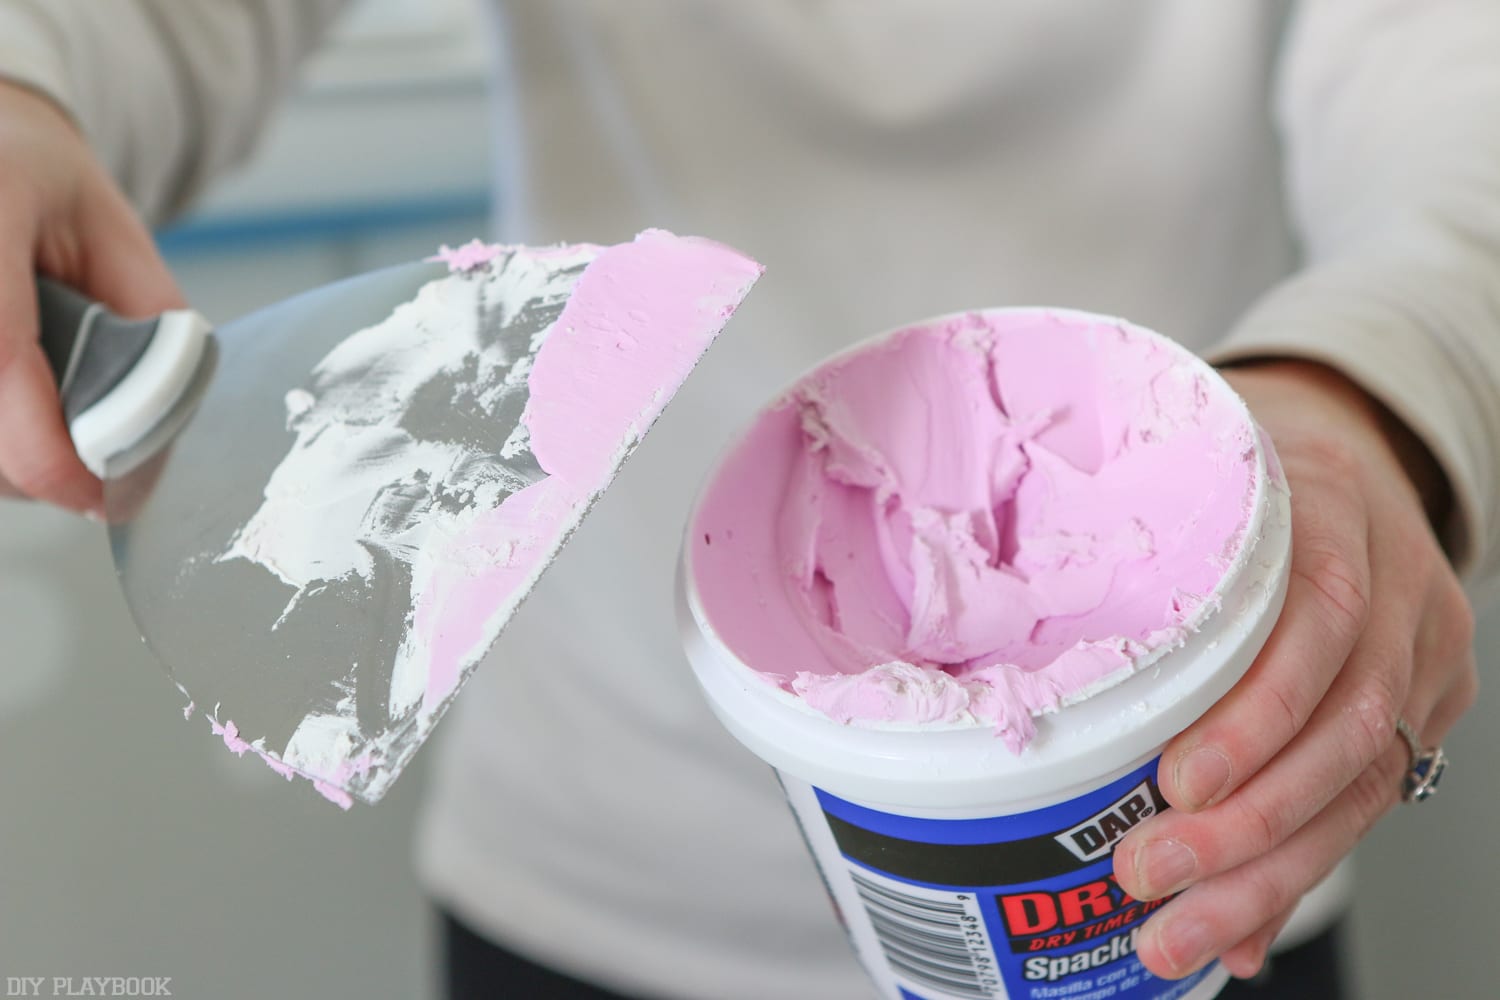 It's always best to use spackle to cover imperfections and holes.